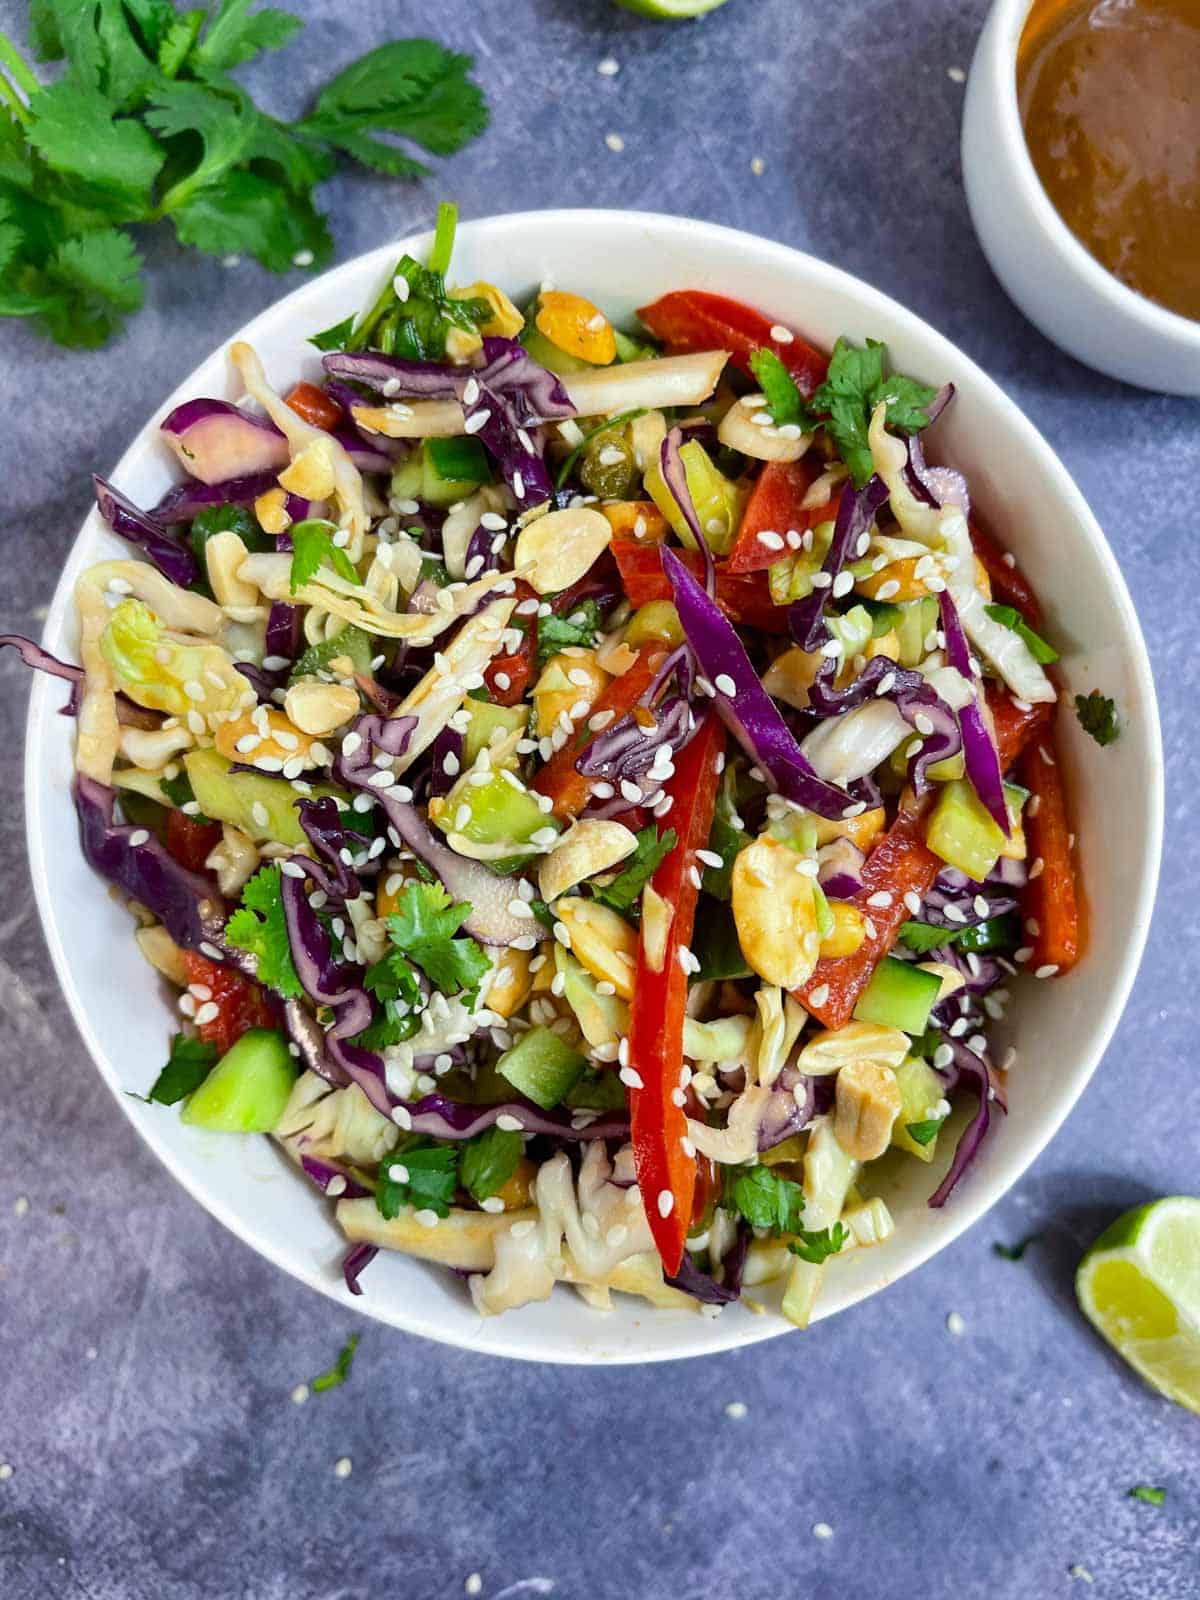 Thai Salad with delicious creamy Peanut Dressing served in a bowl garnished with sesame seeds and peanuts with side of dressing and lemon wedge